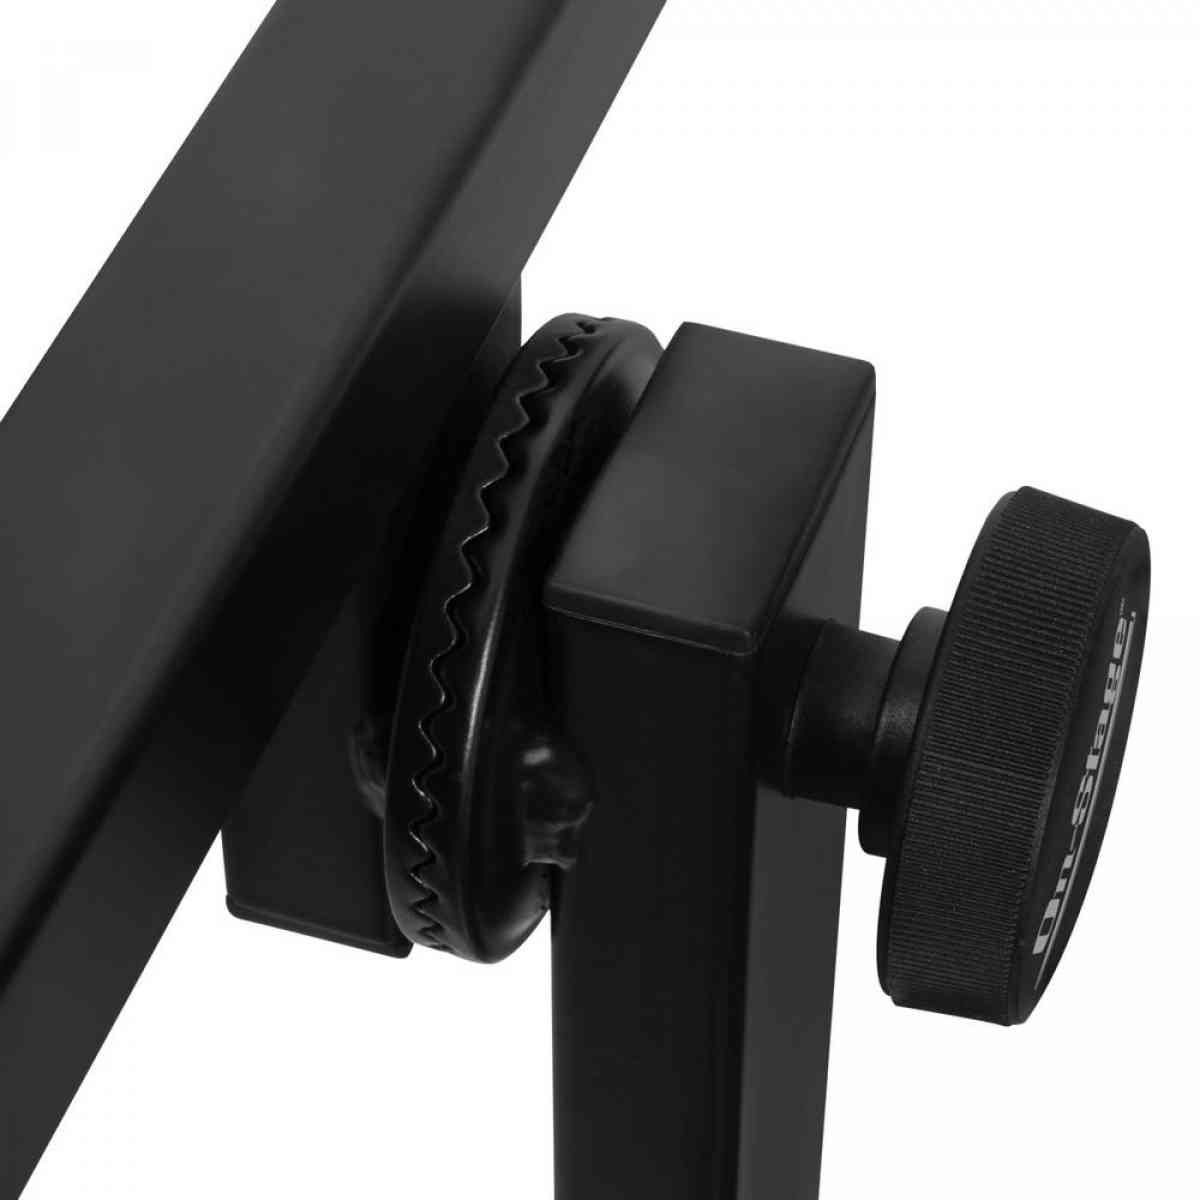 On-Stage KS7350 OnFolding-Z Keyboard Stand